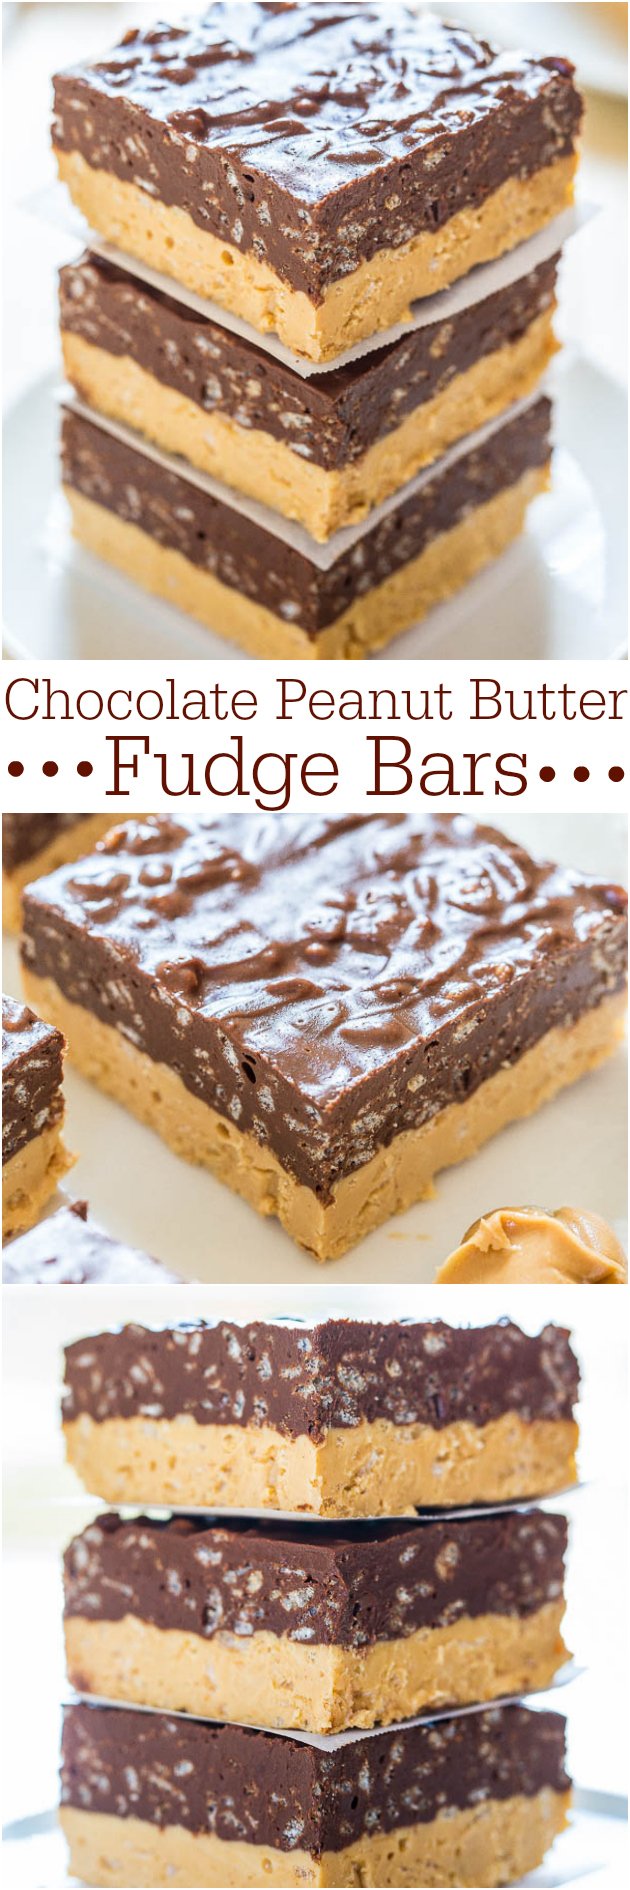 Chocolate Peanut Butter Fudge Bars - Can't decide if you want PB or chocolate? Make these easy, no-bake bars! Chocolate + PB is sooo irresistible!!